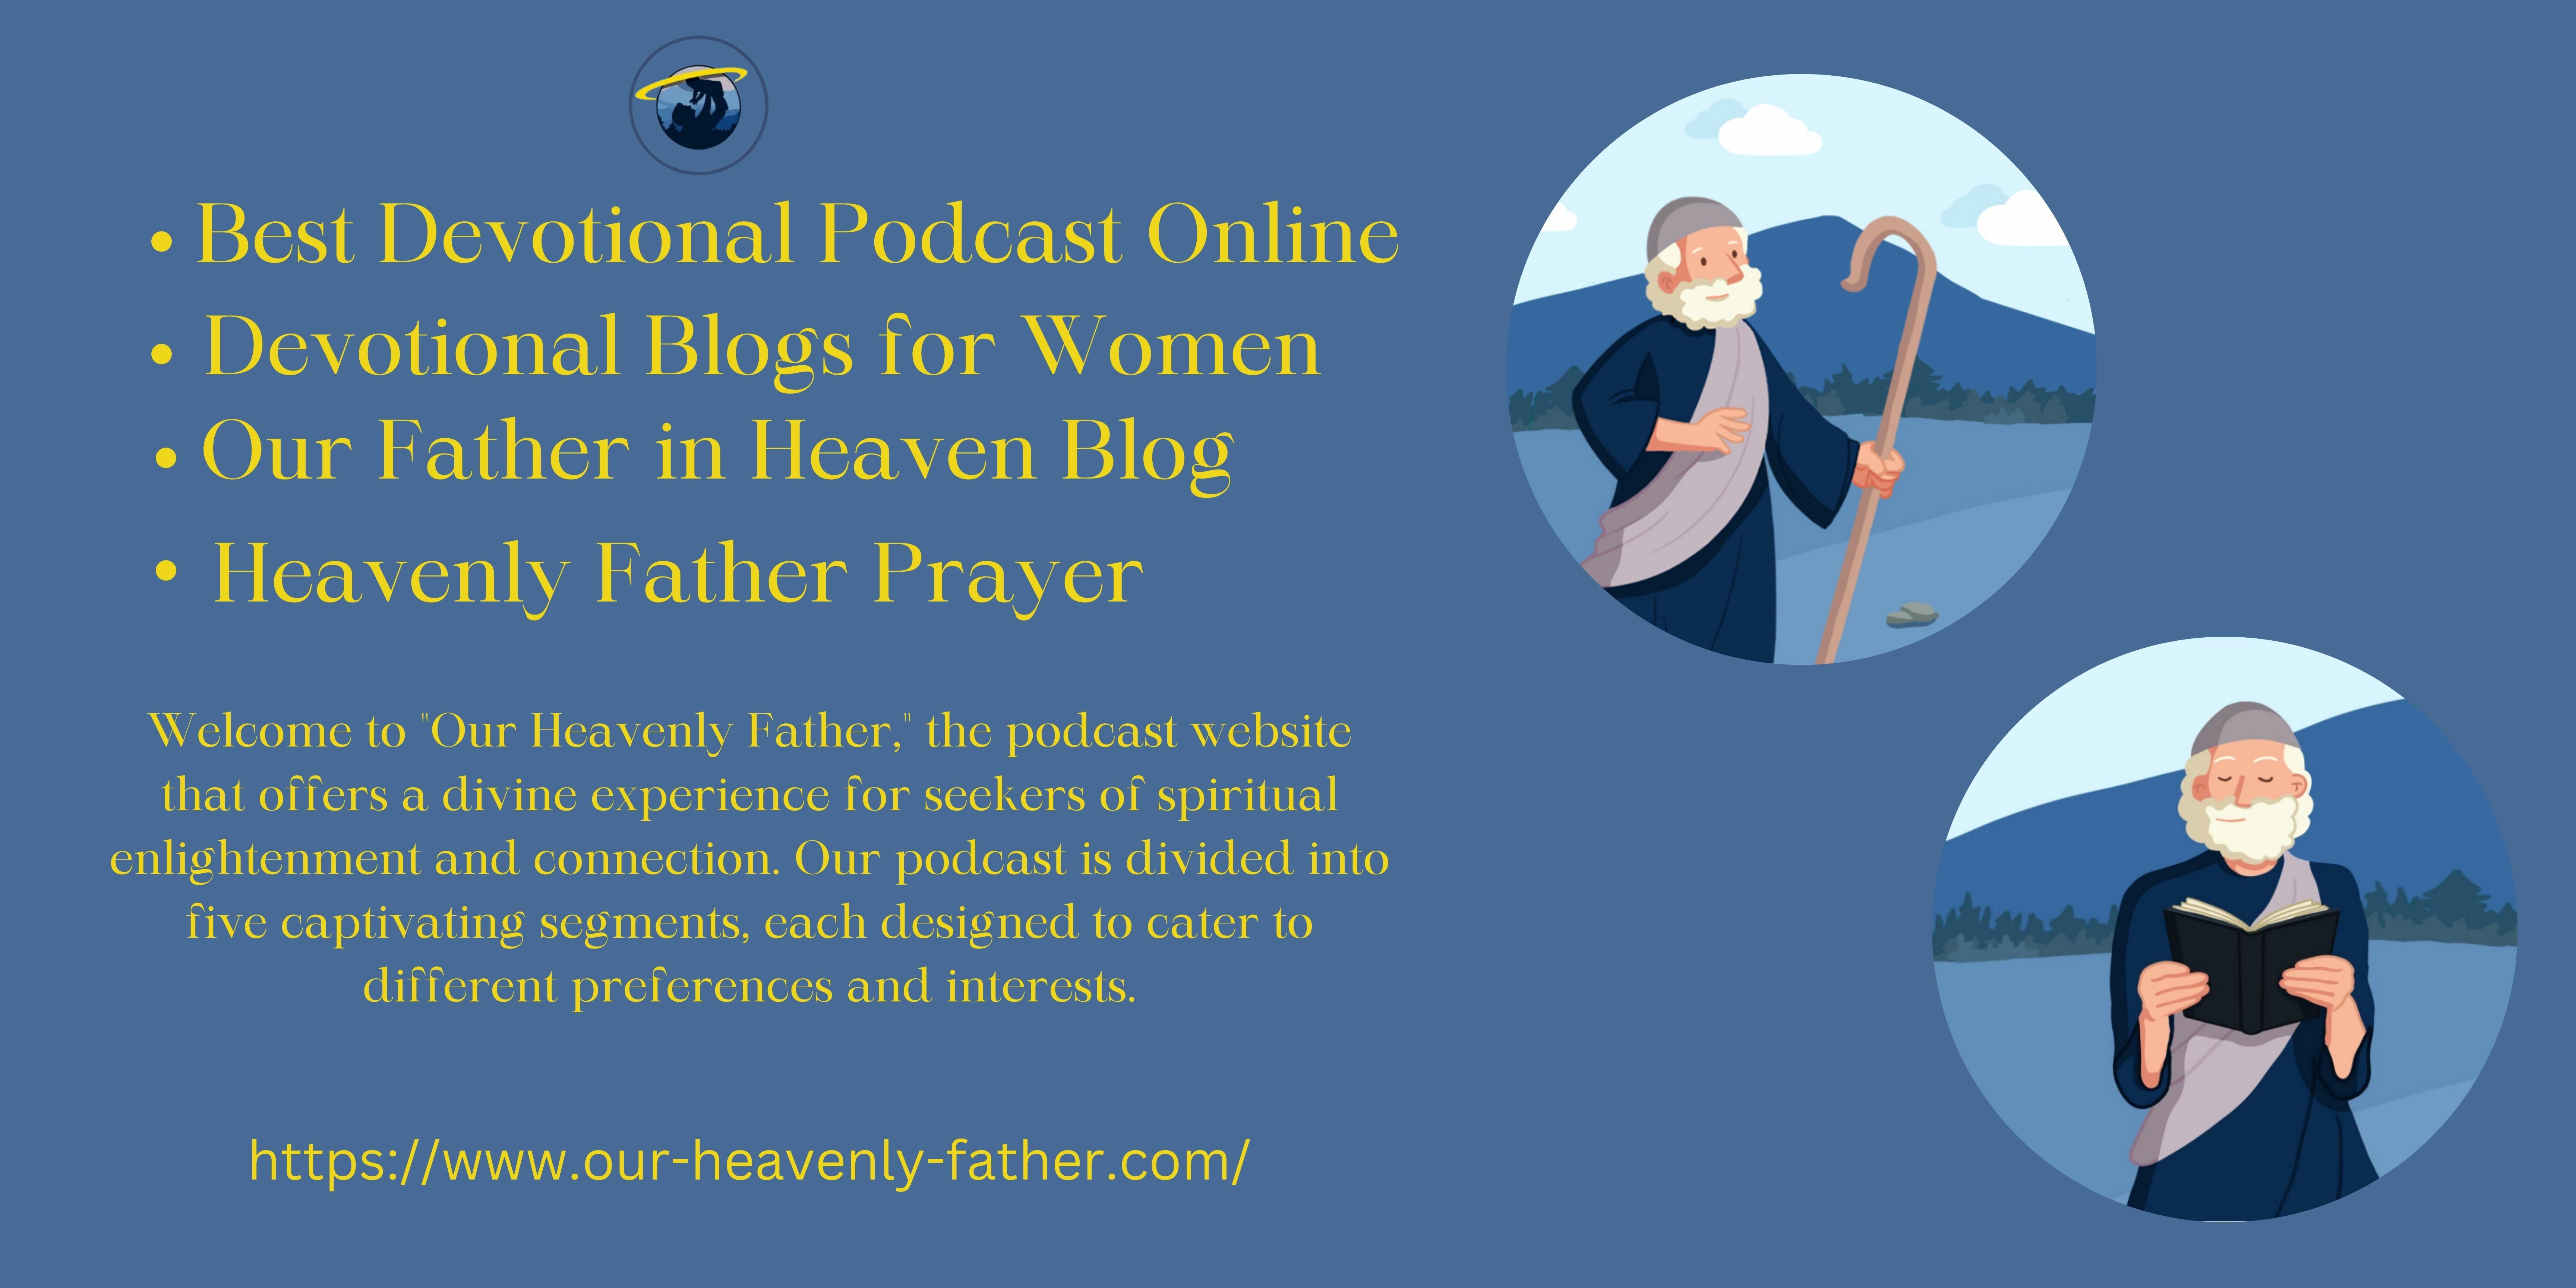 ourheavenlyfather on Gab: 'Heavenly Father Prayer Our Heavenly Father Prayer…' - Gab Social